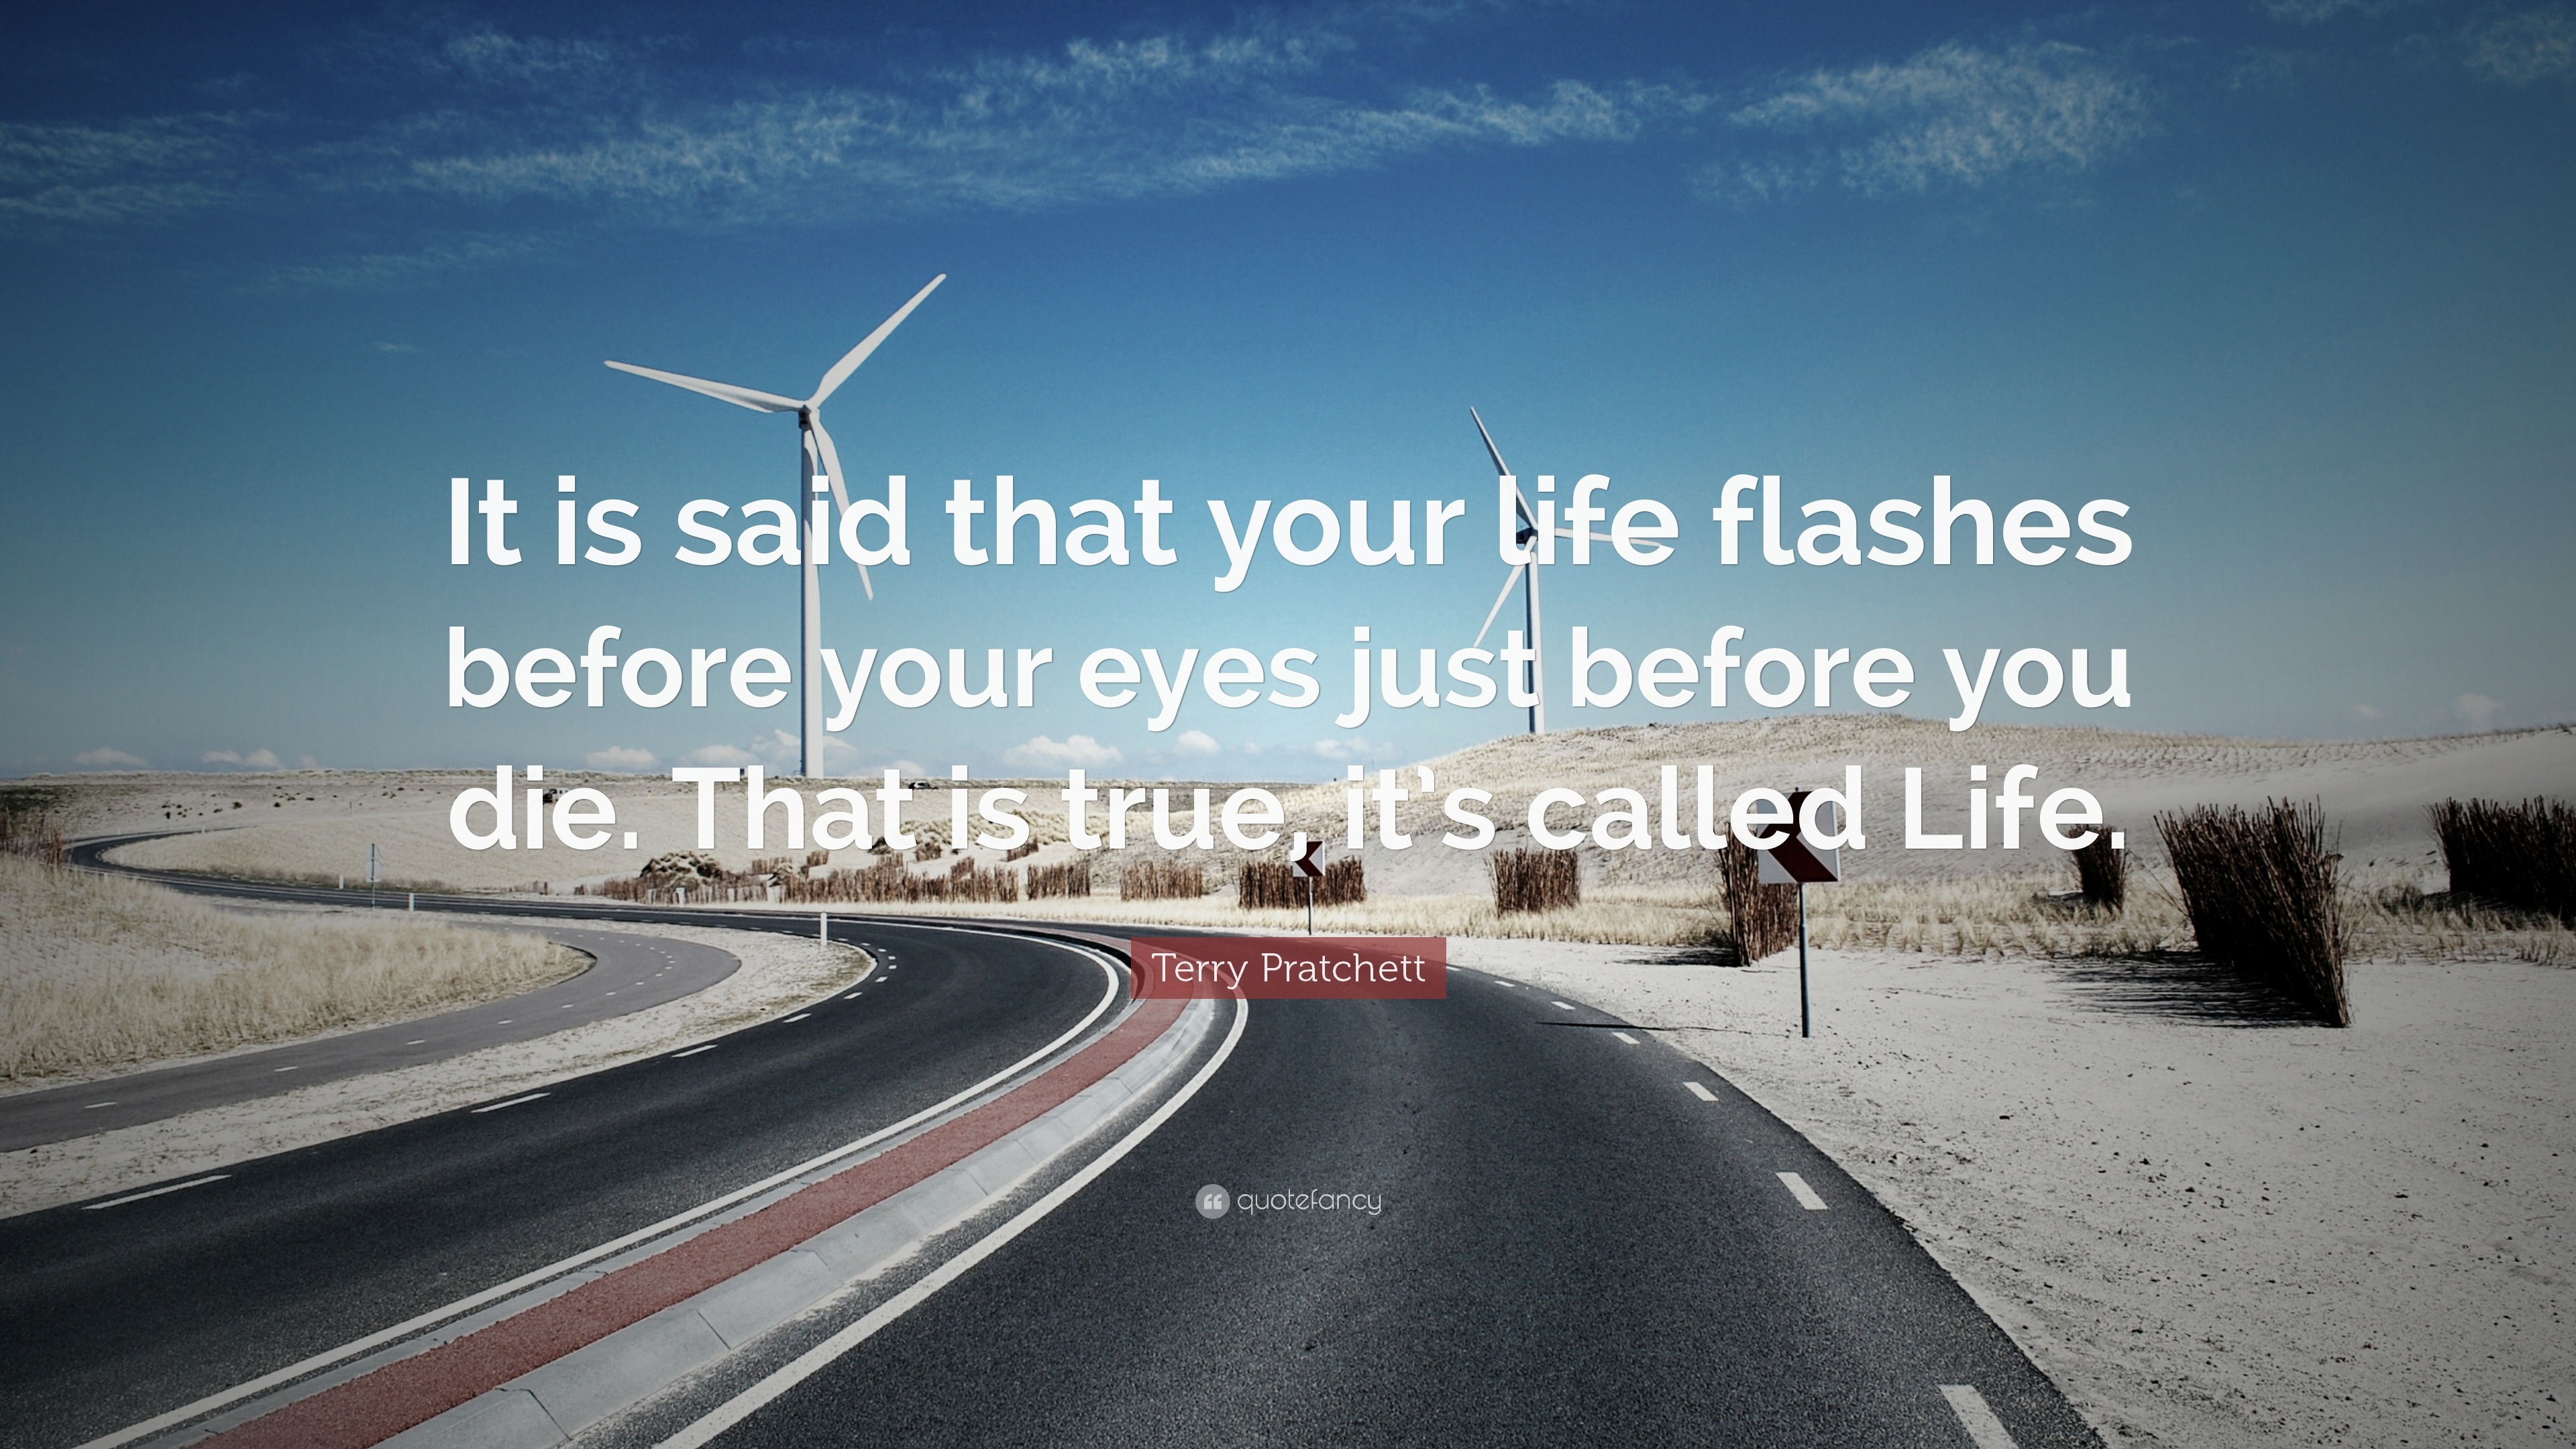 life flashes before your eyes quote